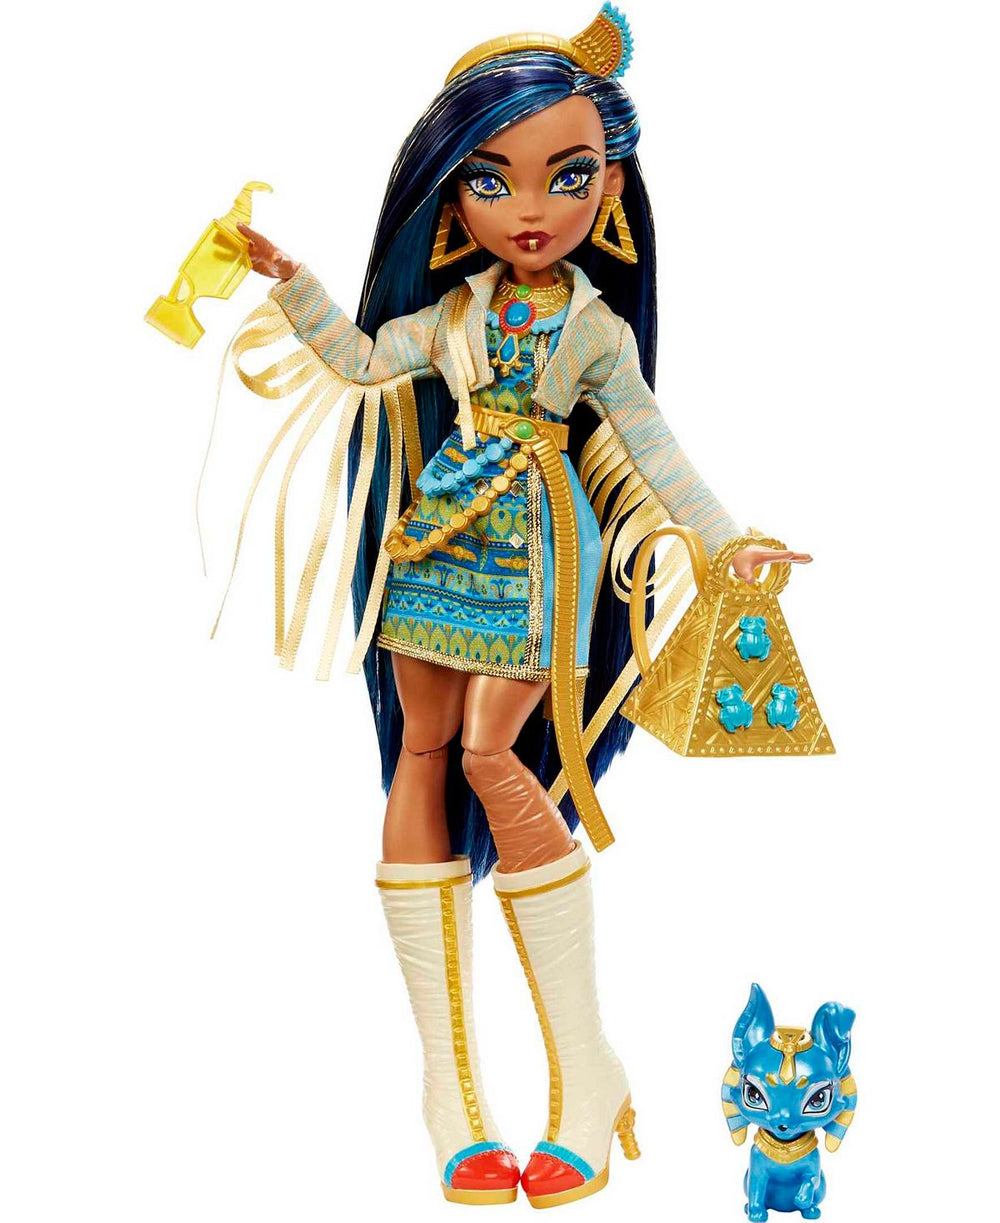 Monster High Fashion Doll - Cleo de Nile with Royal Accessories